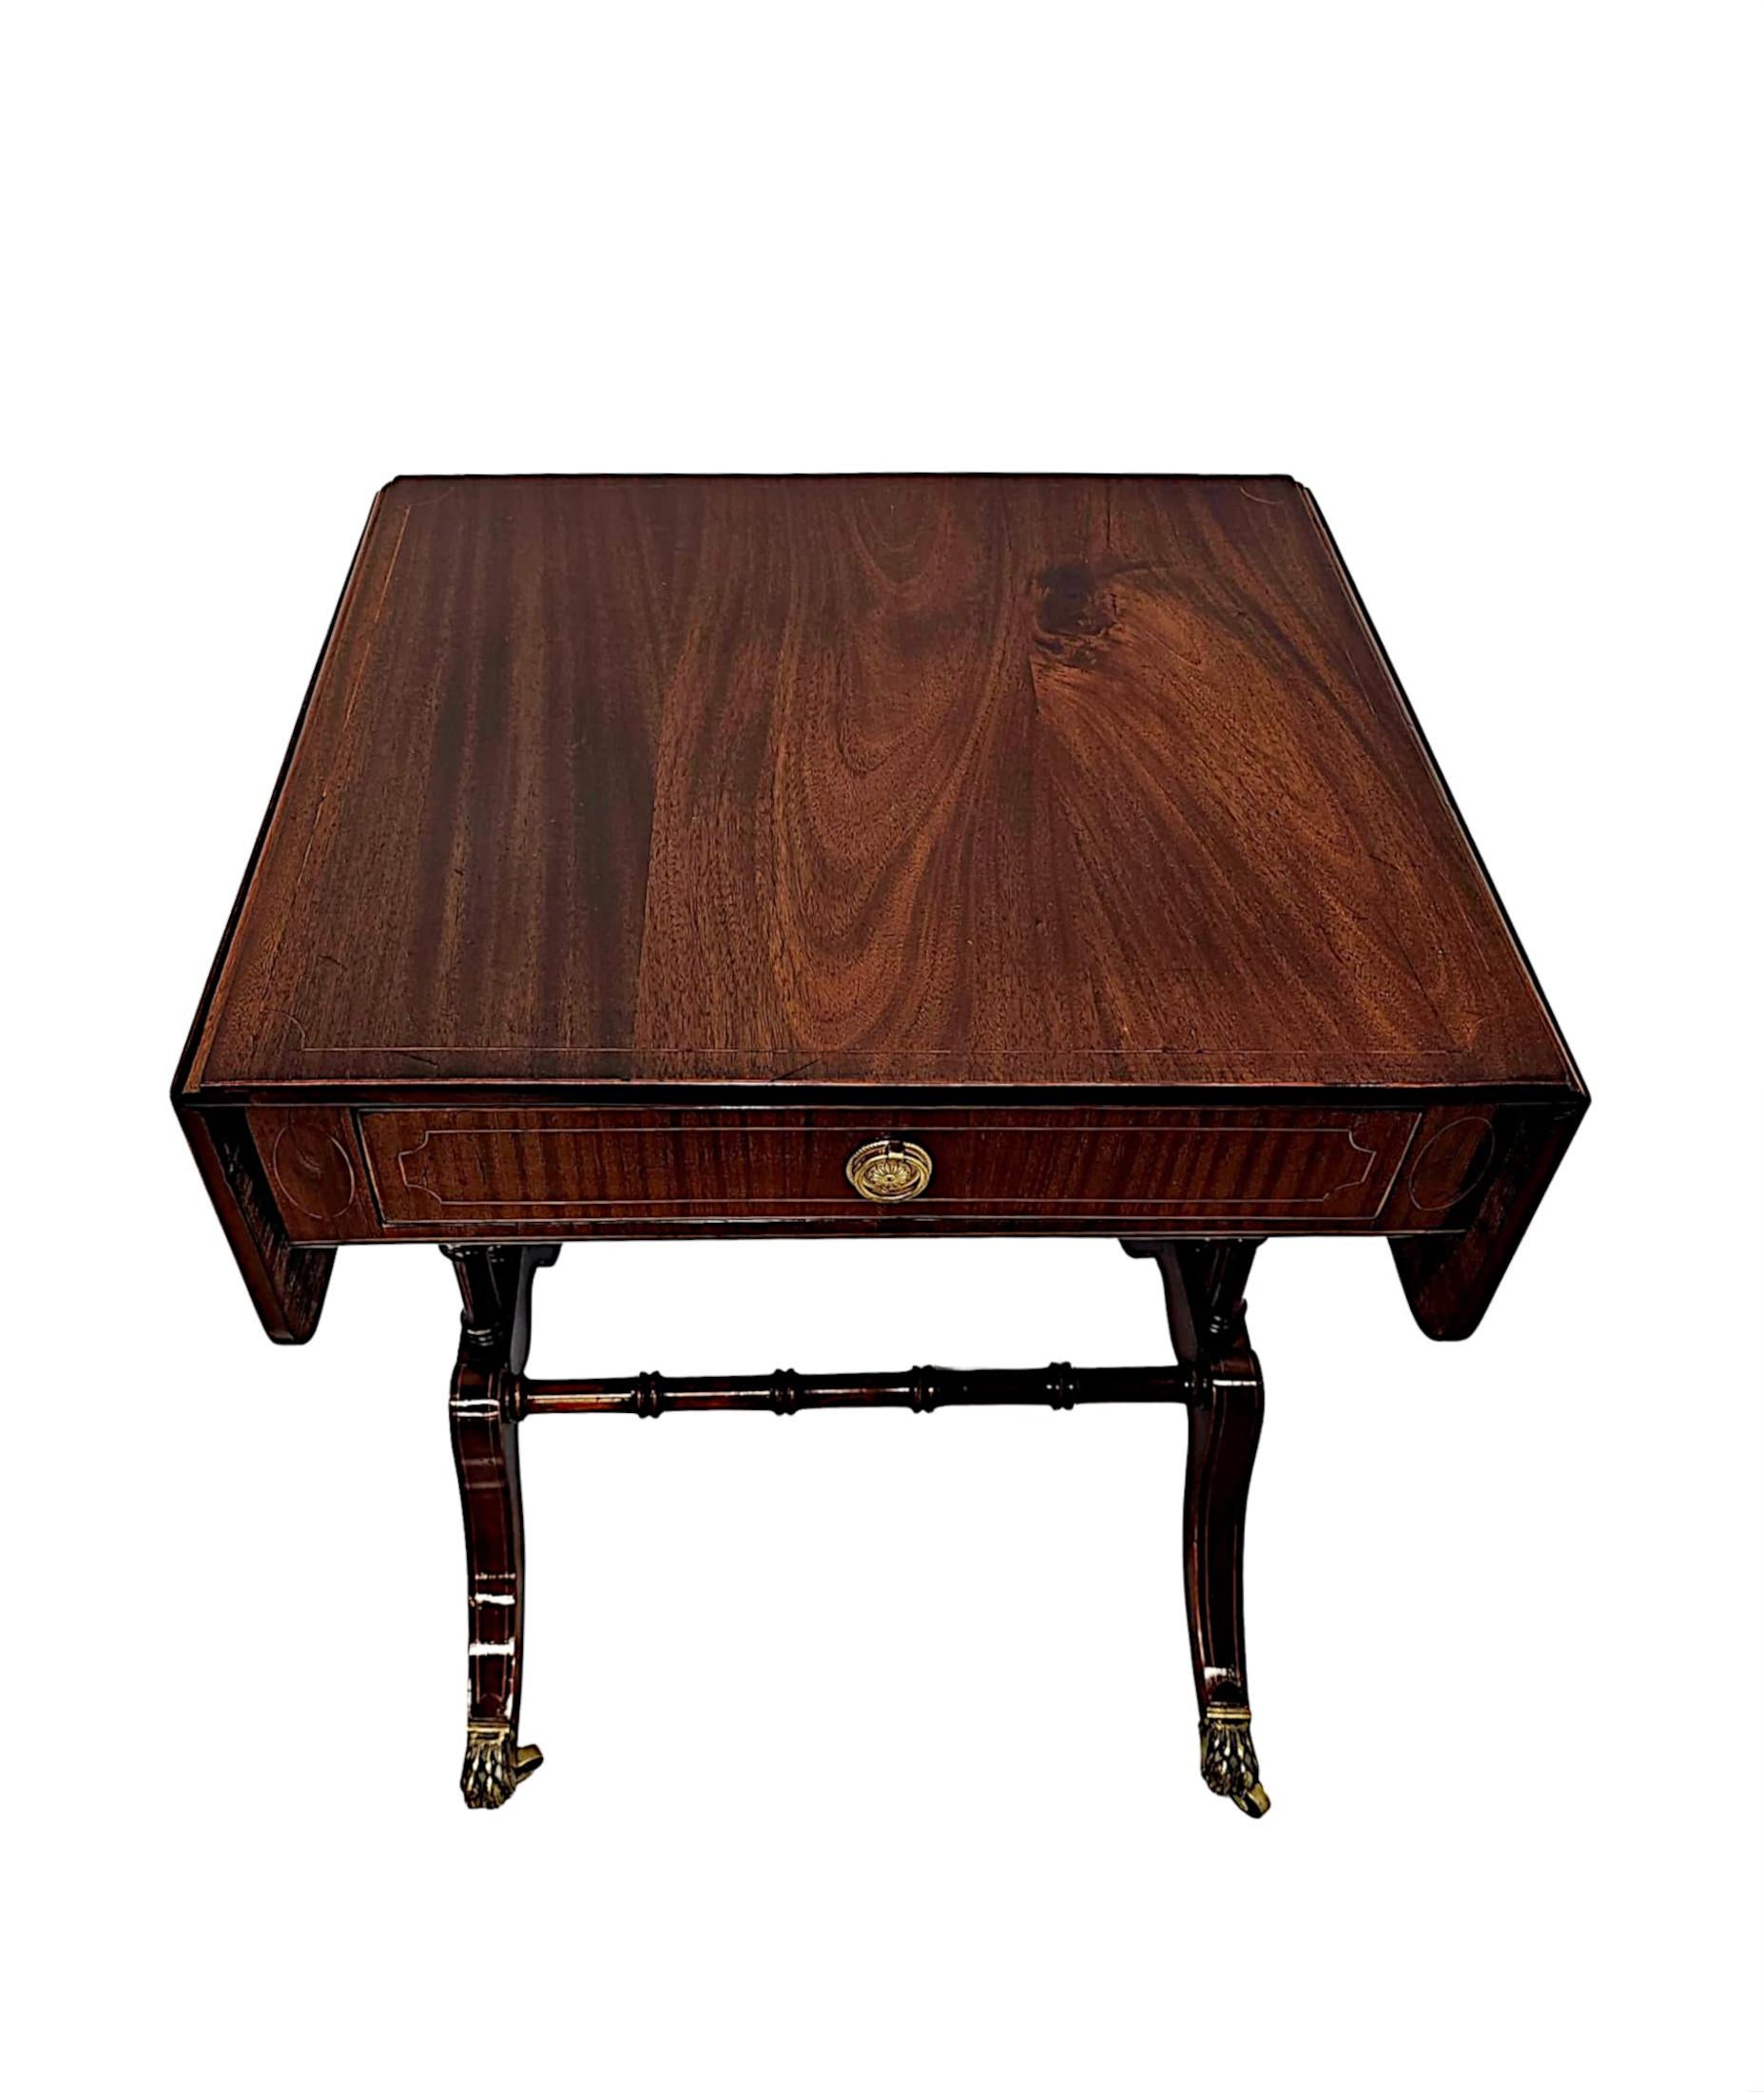 English  A Fabulous Late 19th Century Inlaid Sofa or Lamp Table For Sale